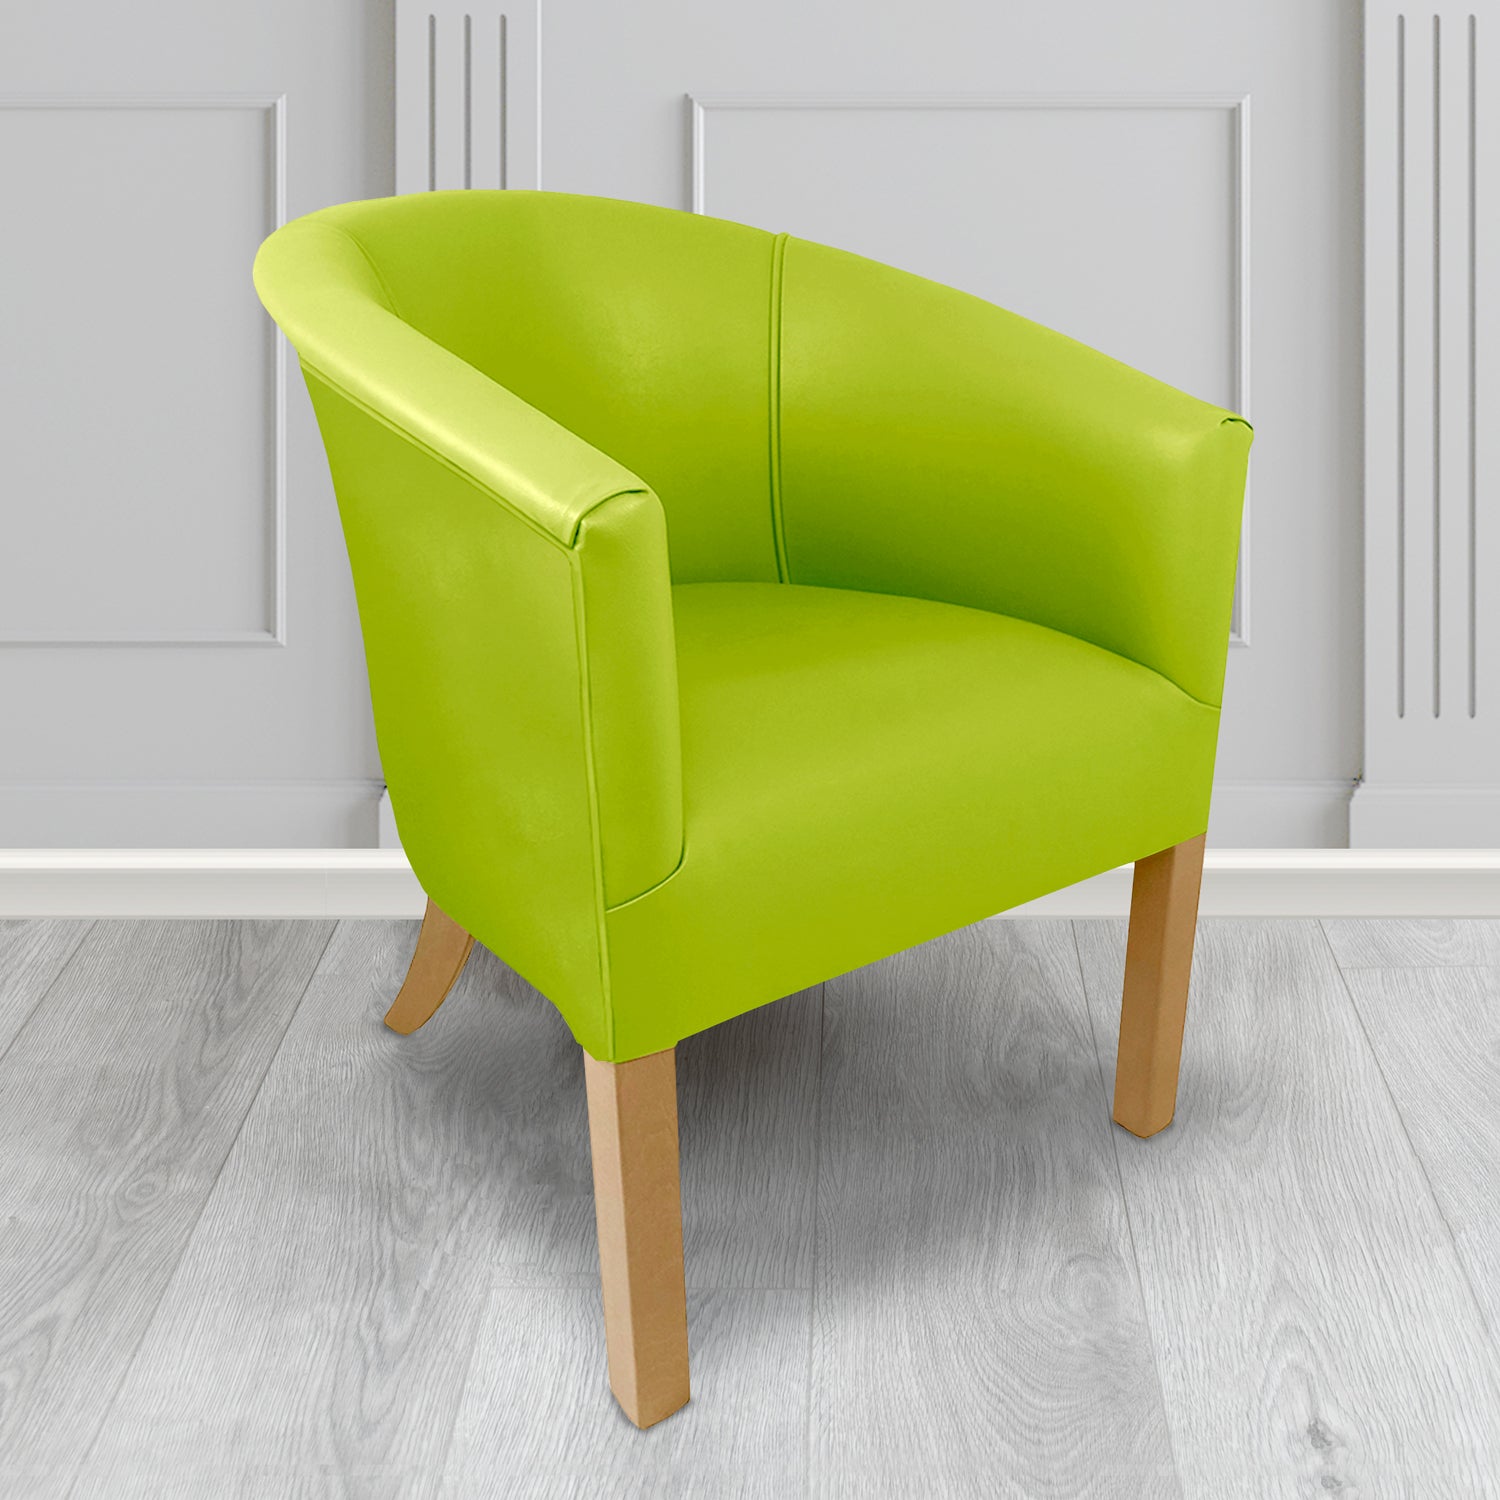 Lewisham Tub Chair in Agua Paint Pot Lime Crib 5 Faux Leather - Antimicrobial, Stain Resistant & Waterproof - The Tub Chair Shop